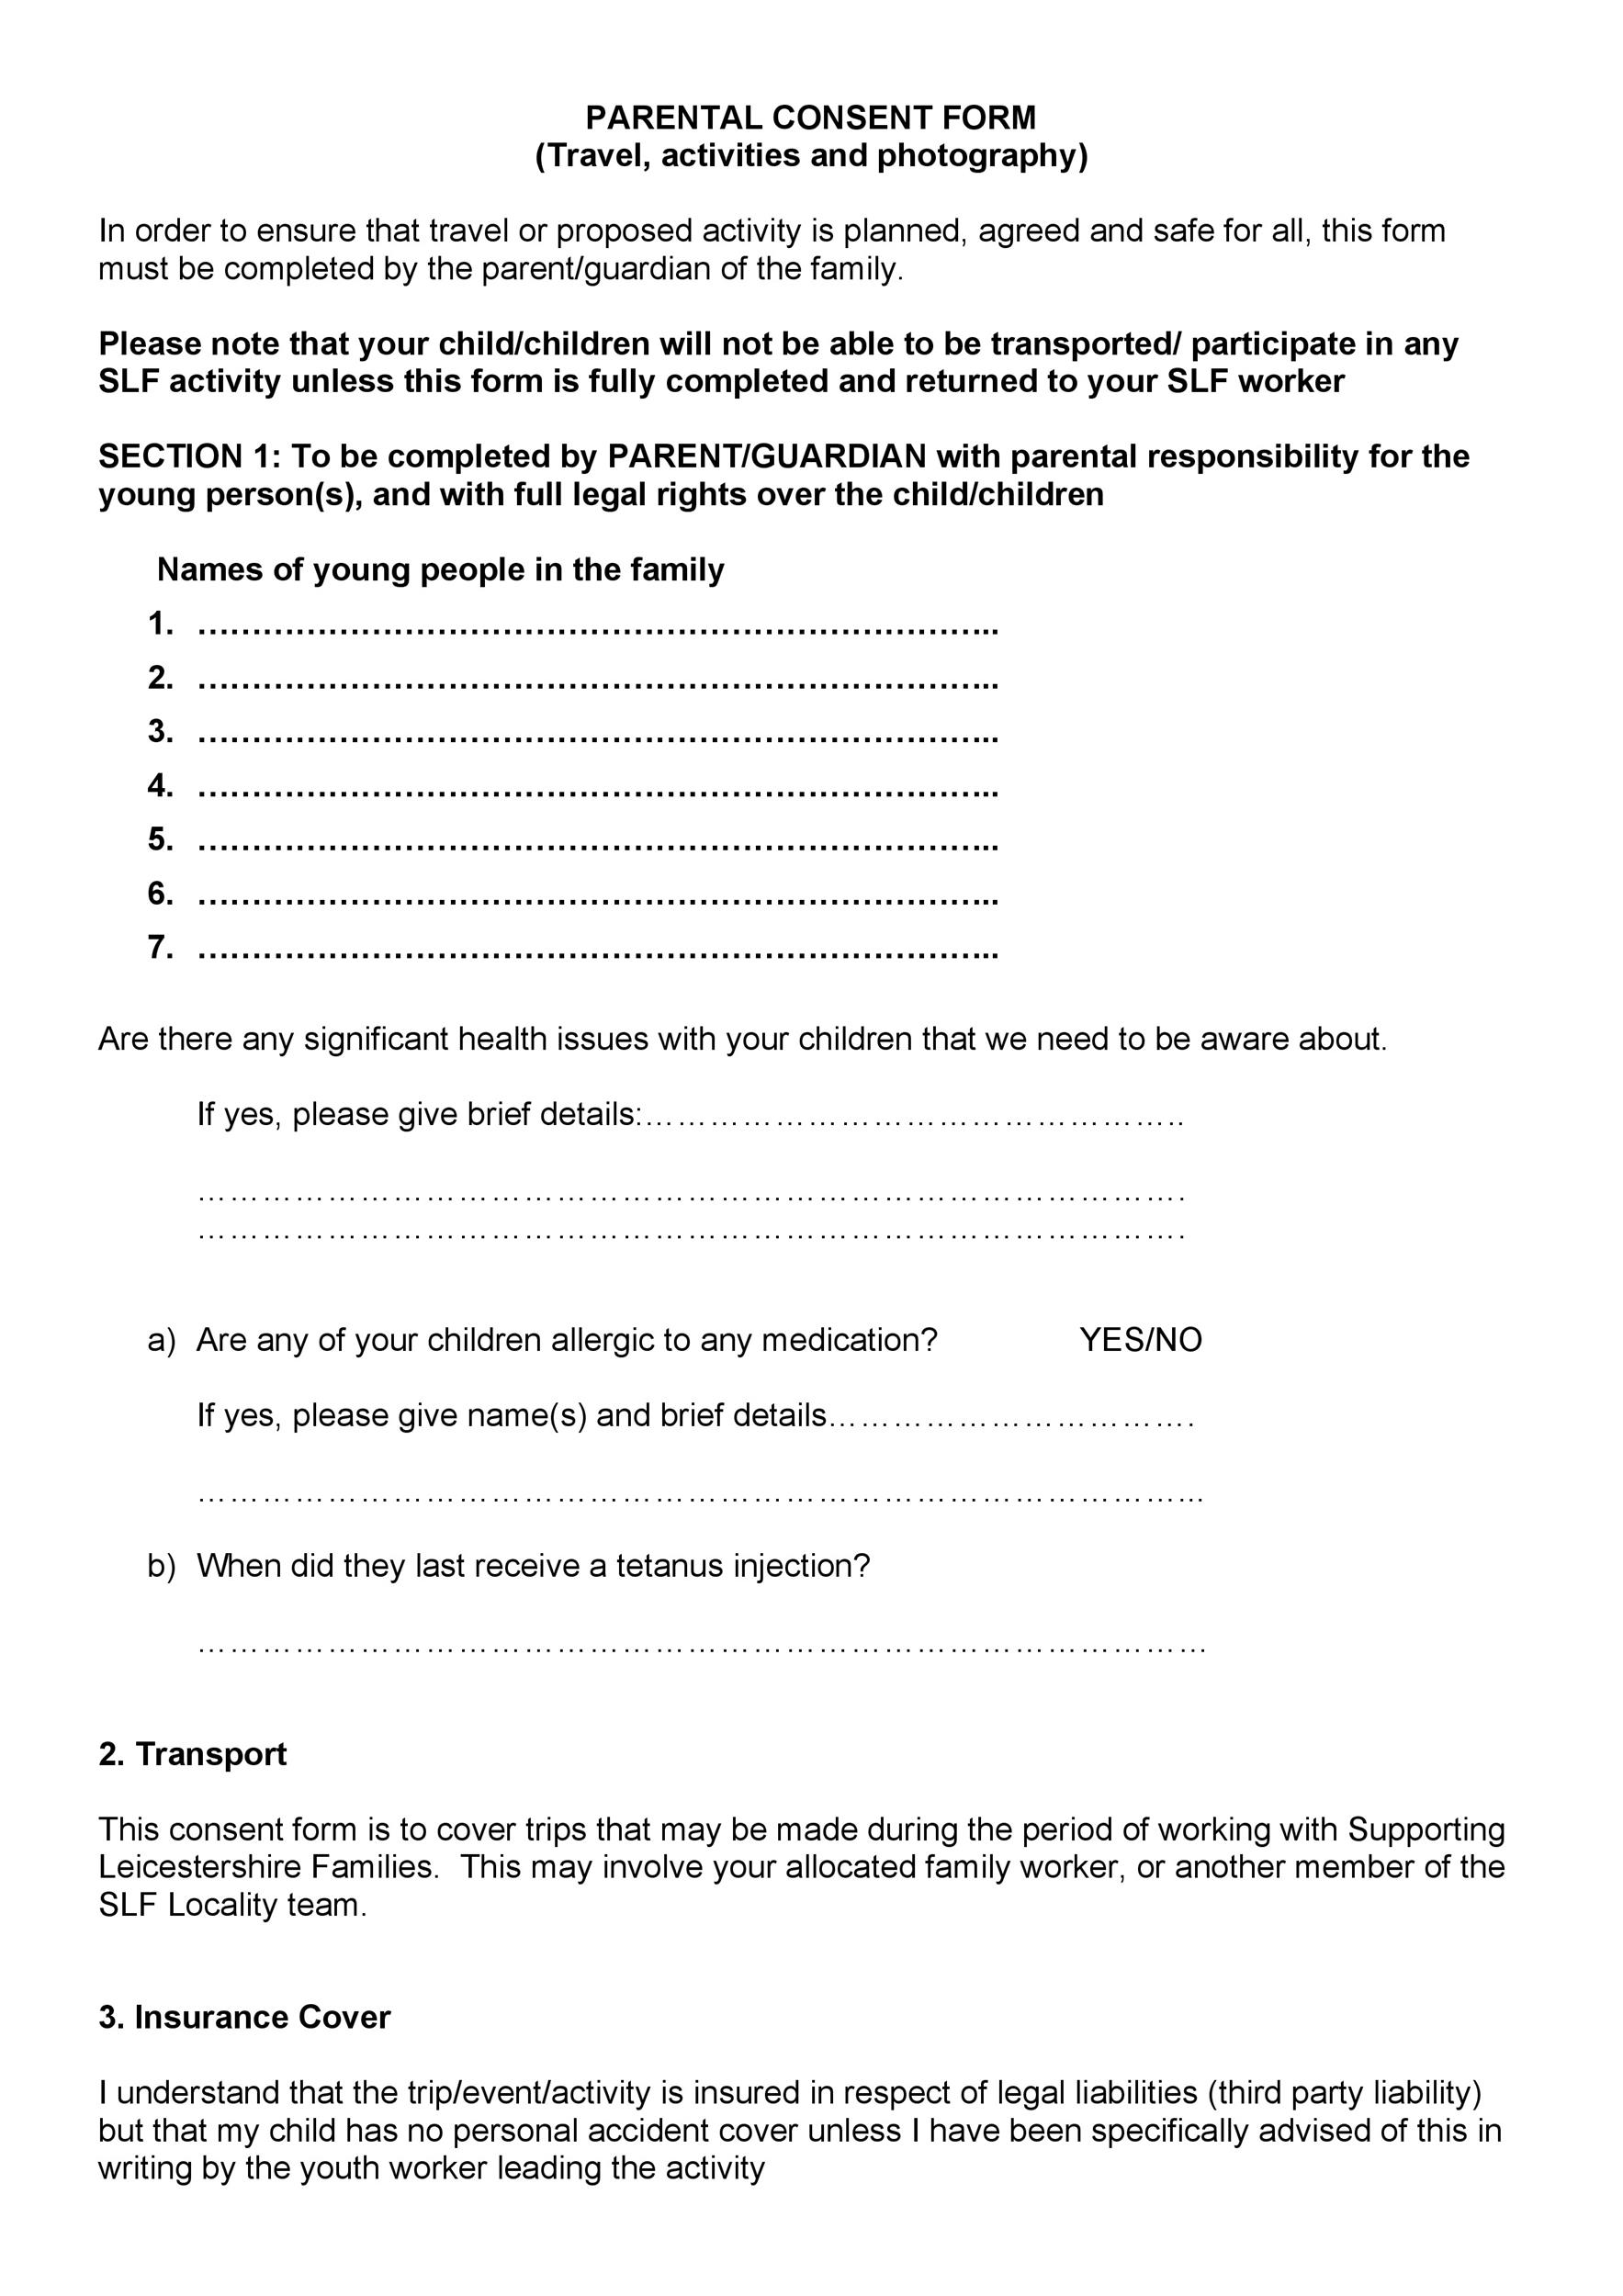 Free parental consent form template 07